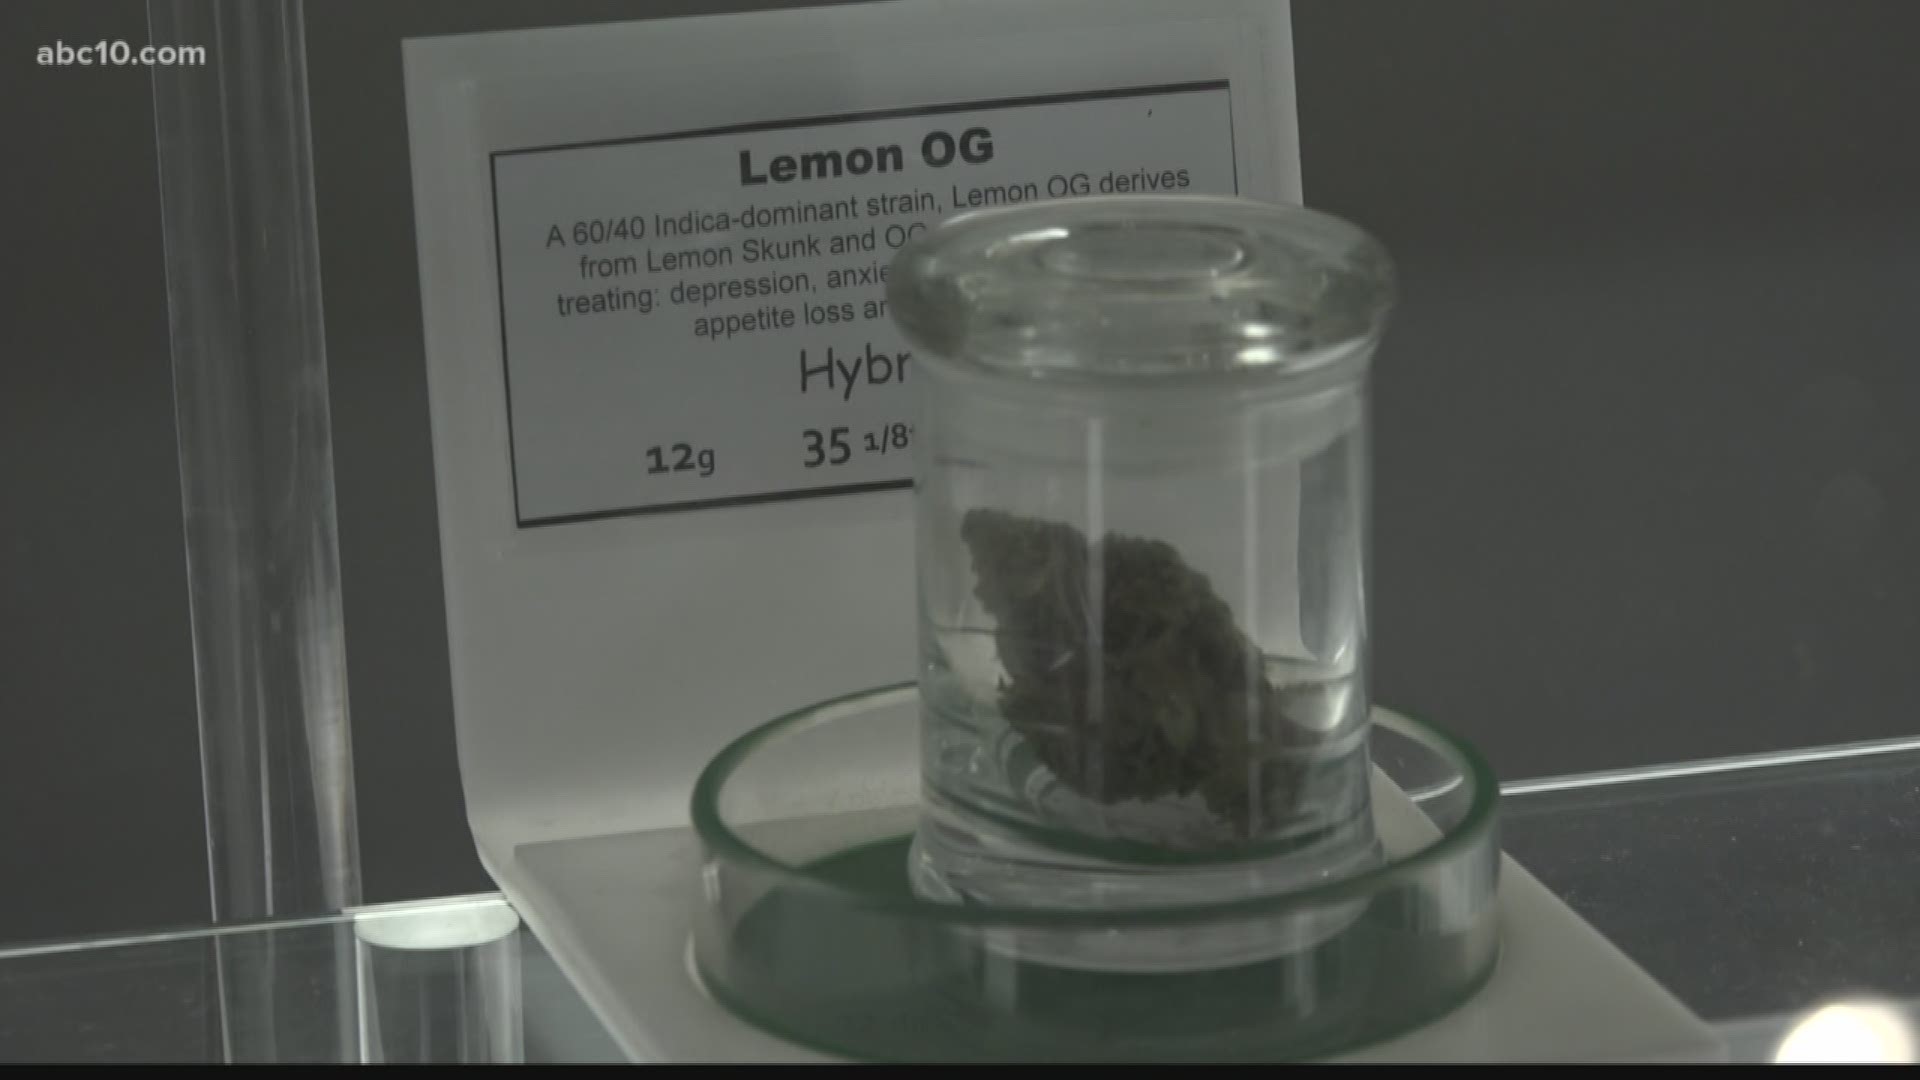 Marijuana shops across the state are rushing to burn through thousands of pounds of cannabis products ahead of new state regulations set to take effect July 1.